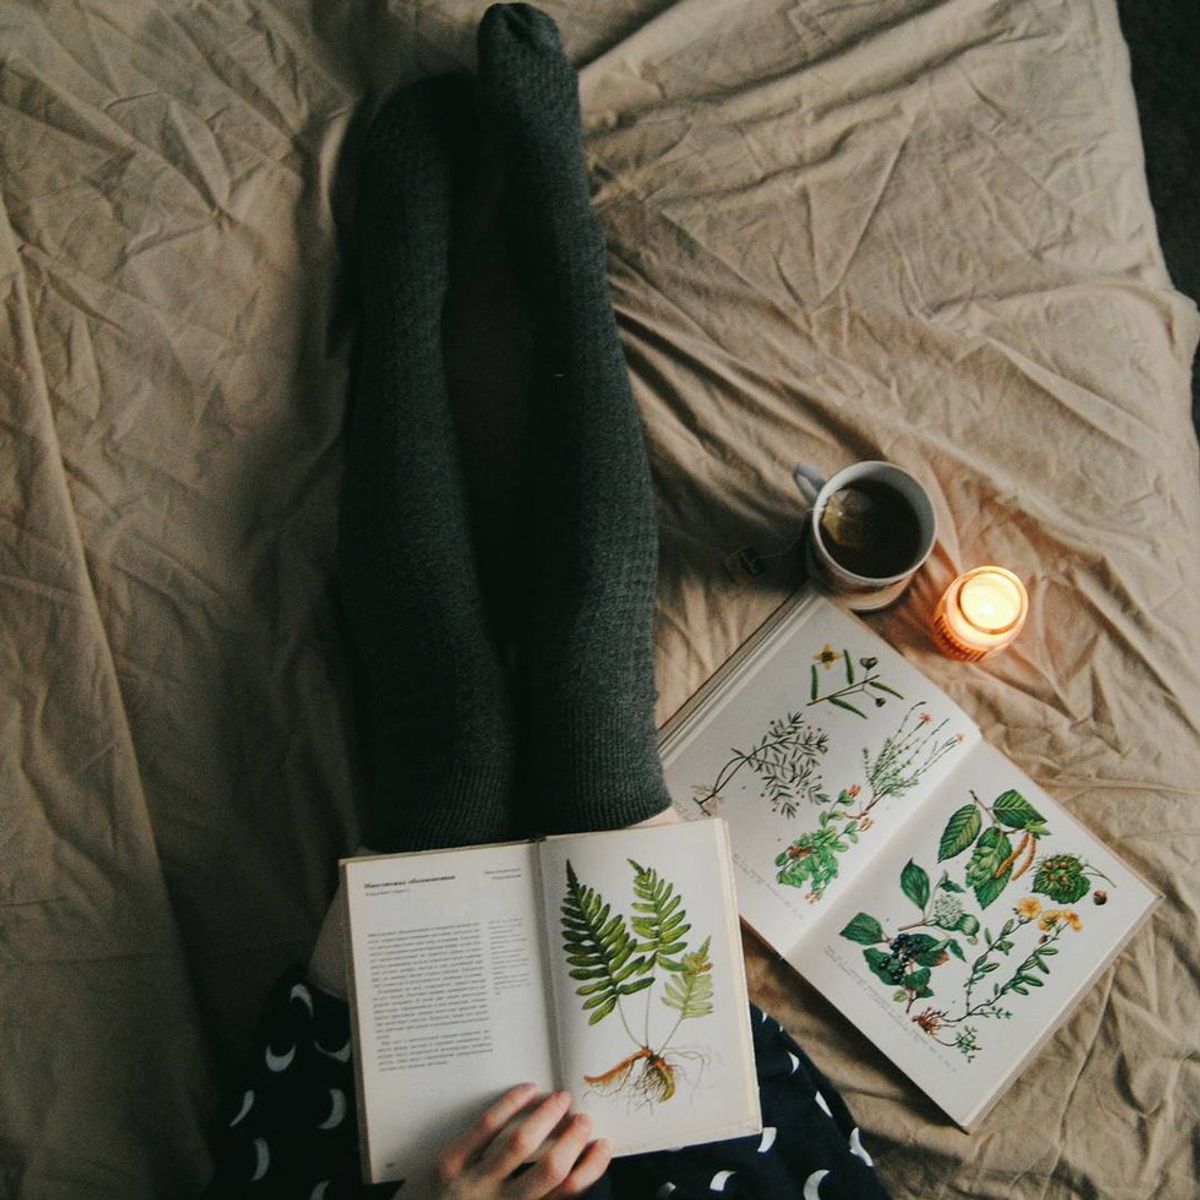 10 Ways To Practice Self-Care During Finals Week